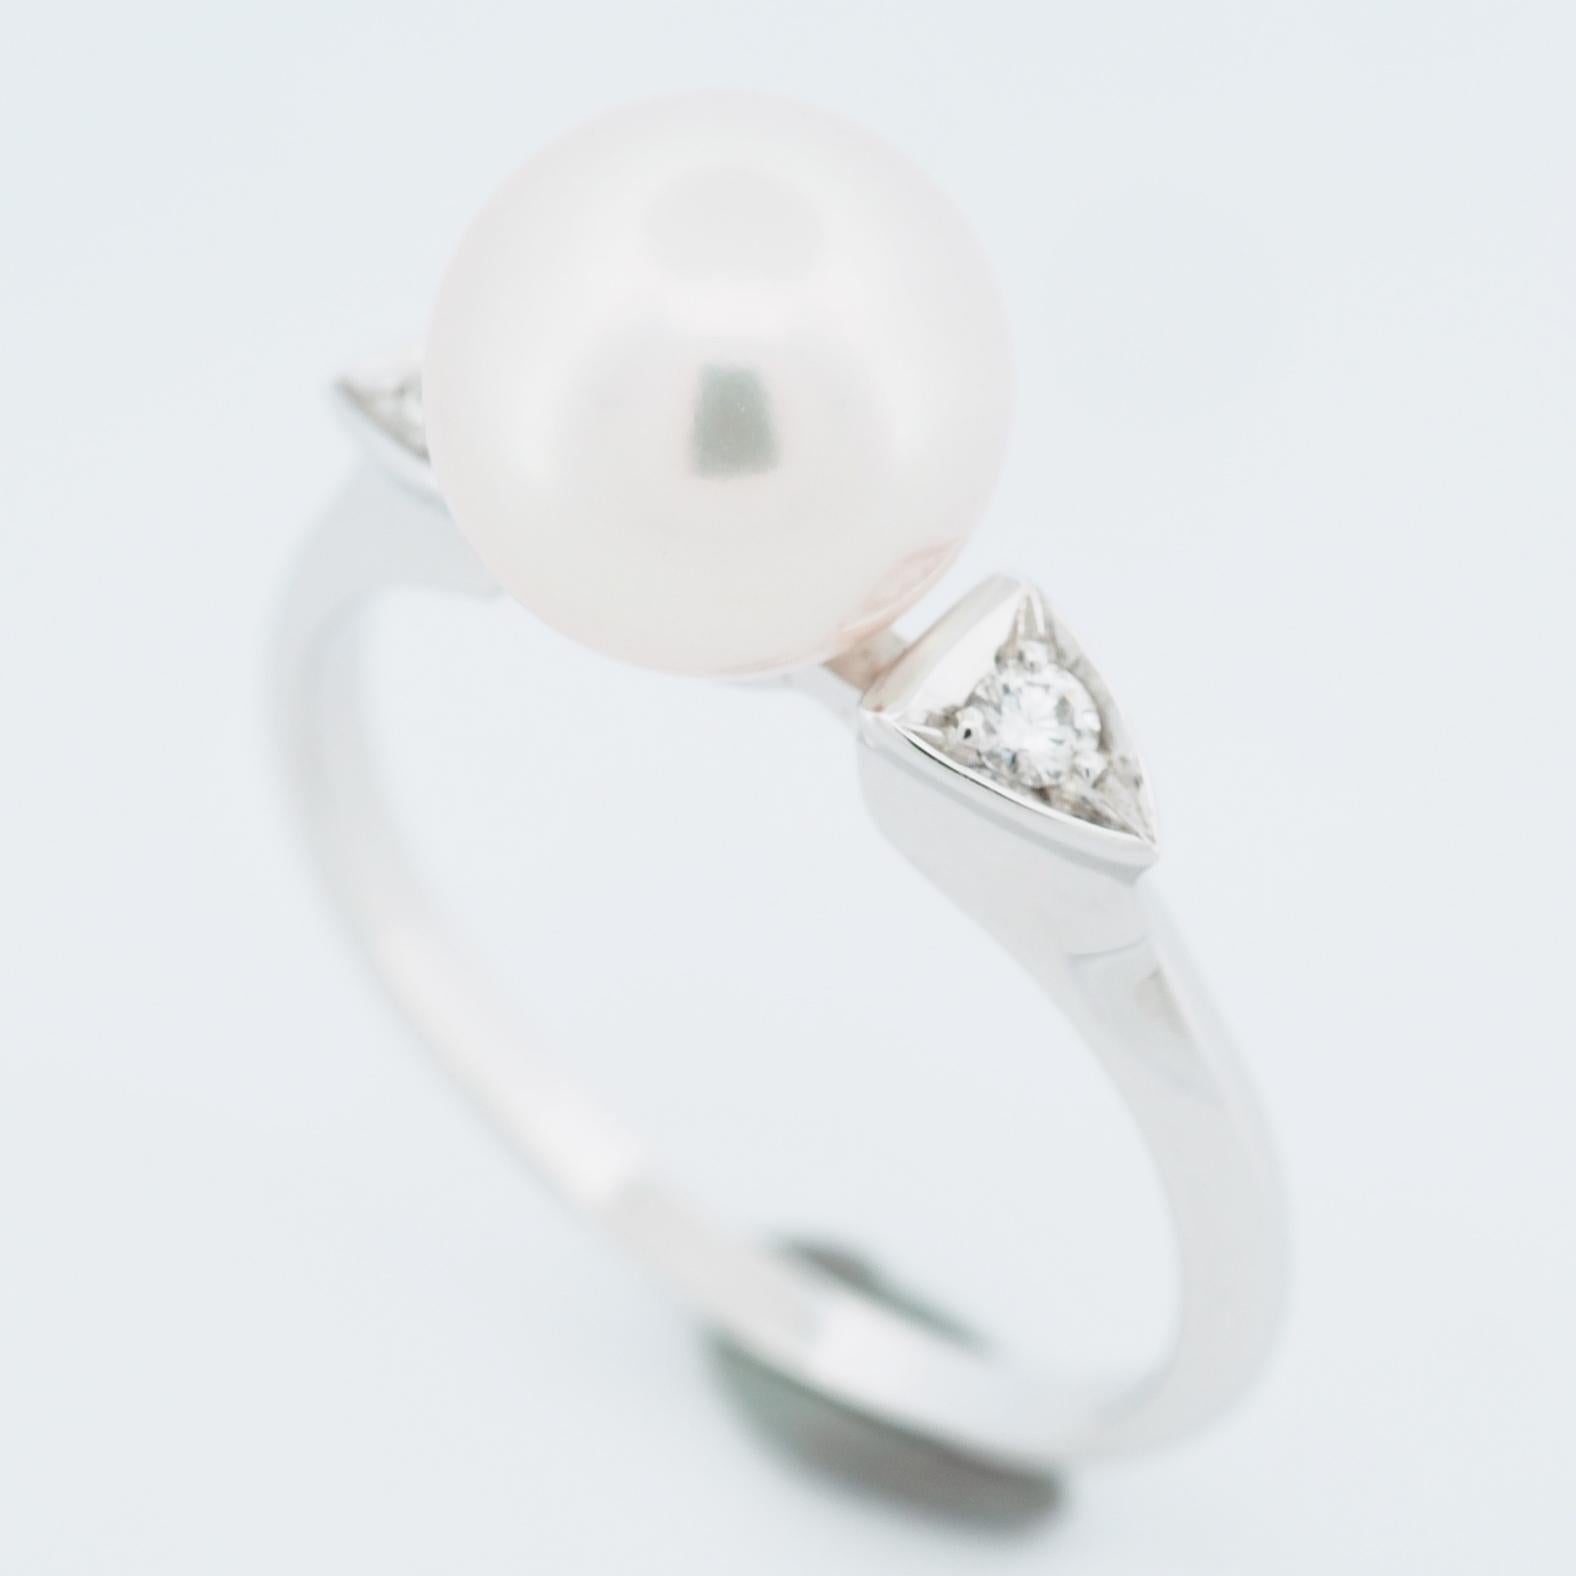 Item: Mikimoto Akoya Pearl Ring
Stones: 8.4 mm Akoya Pearl / Diamonds
Metal: Platinum 950
Ring Size: US SIZE 6.0 UK SIZE L 1/4
Internal Diameter: 16.50 mm
Weight: 3.6 Grams 
Condition: Used (repolished)
Retail Price: ---
Signatures: M,